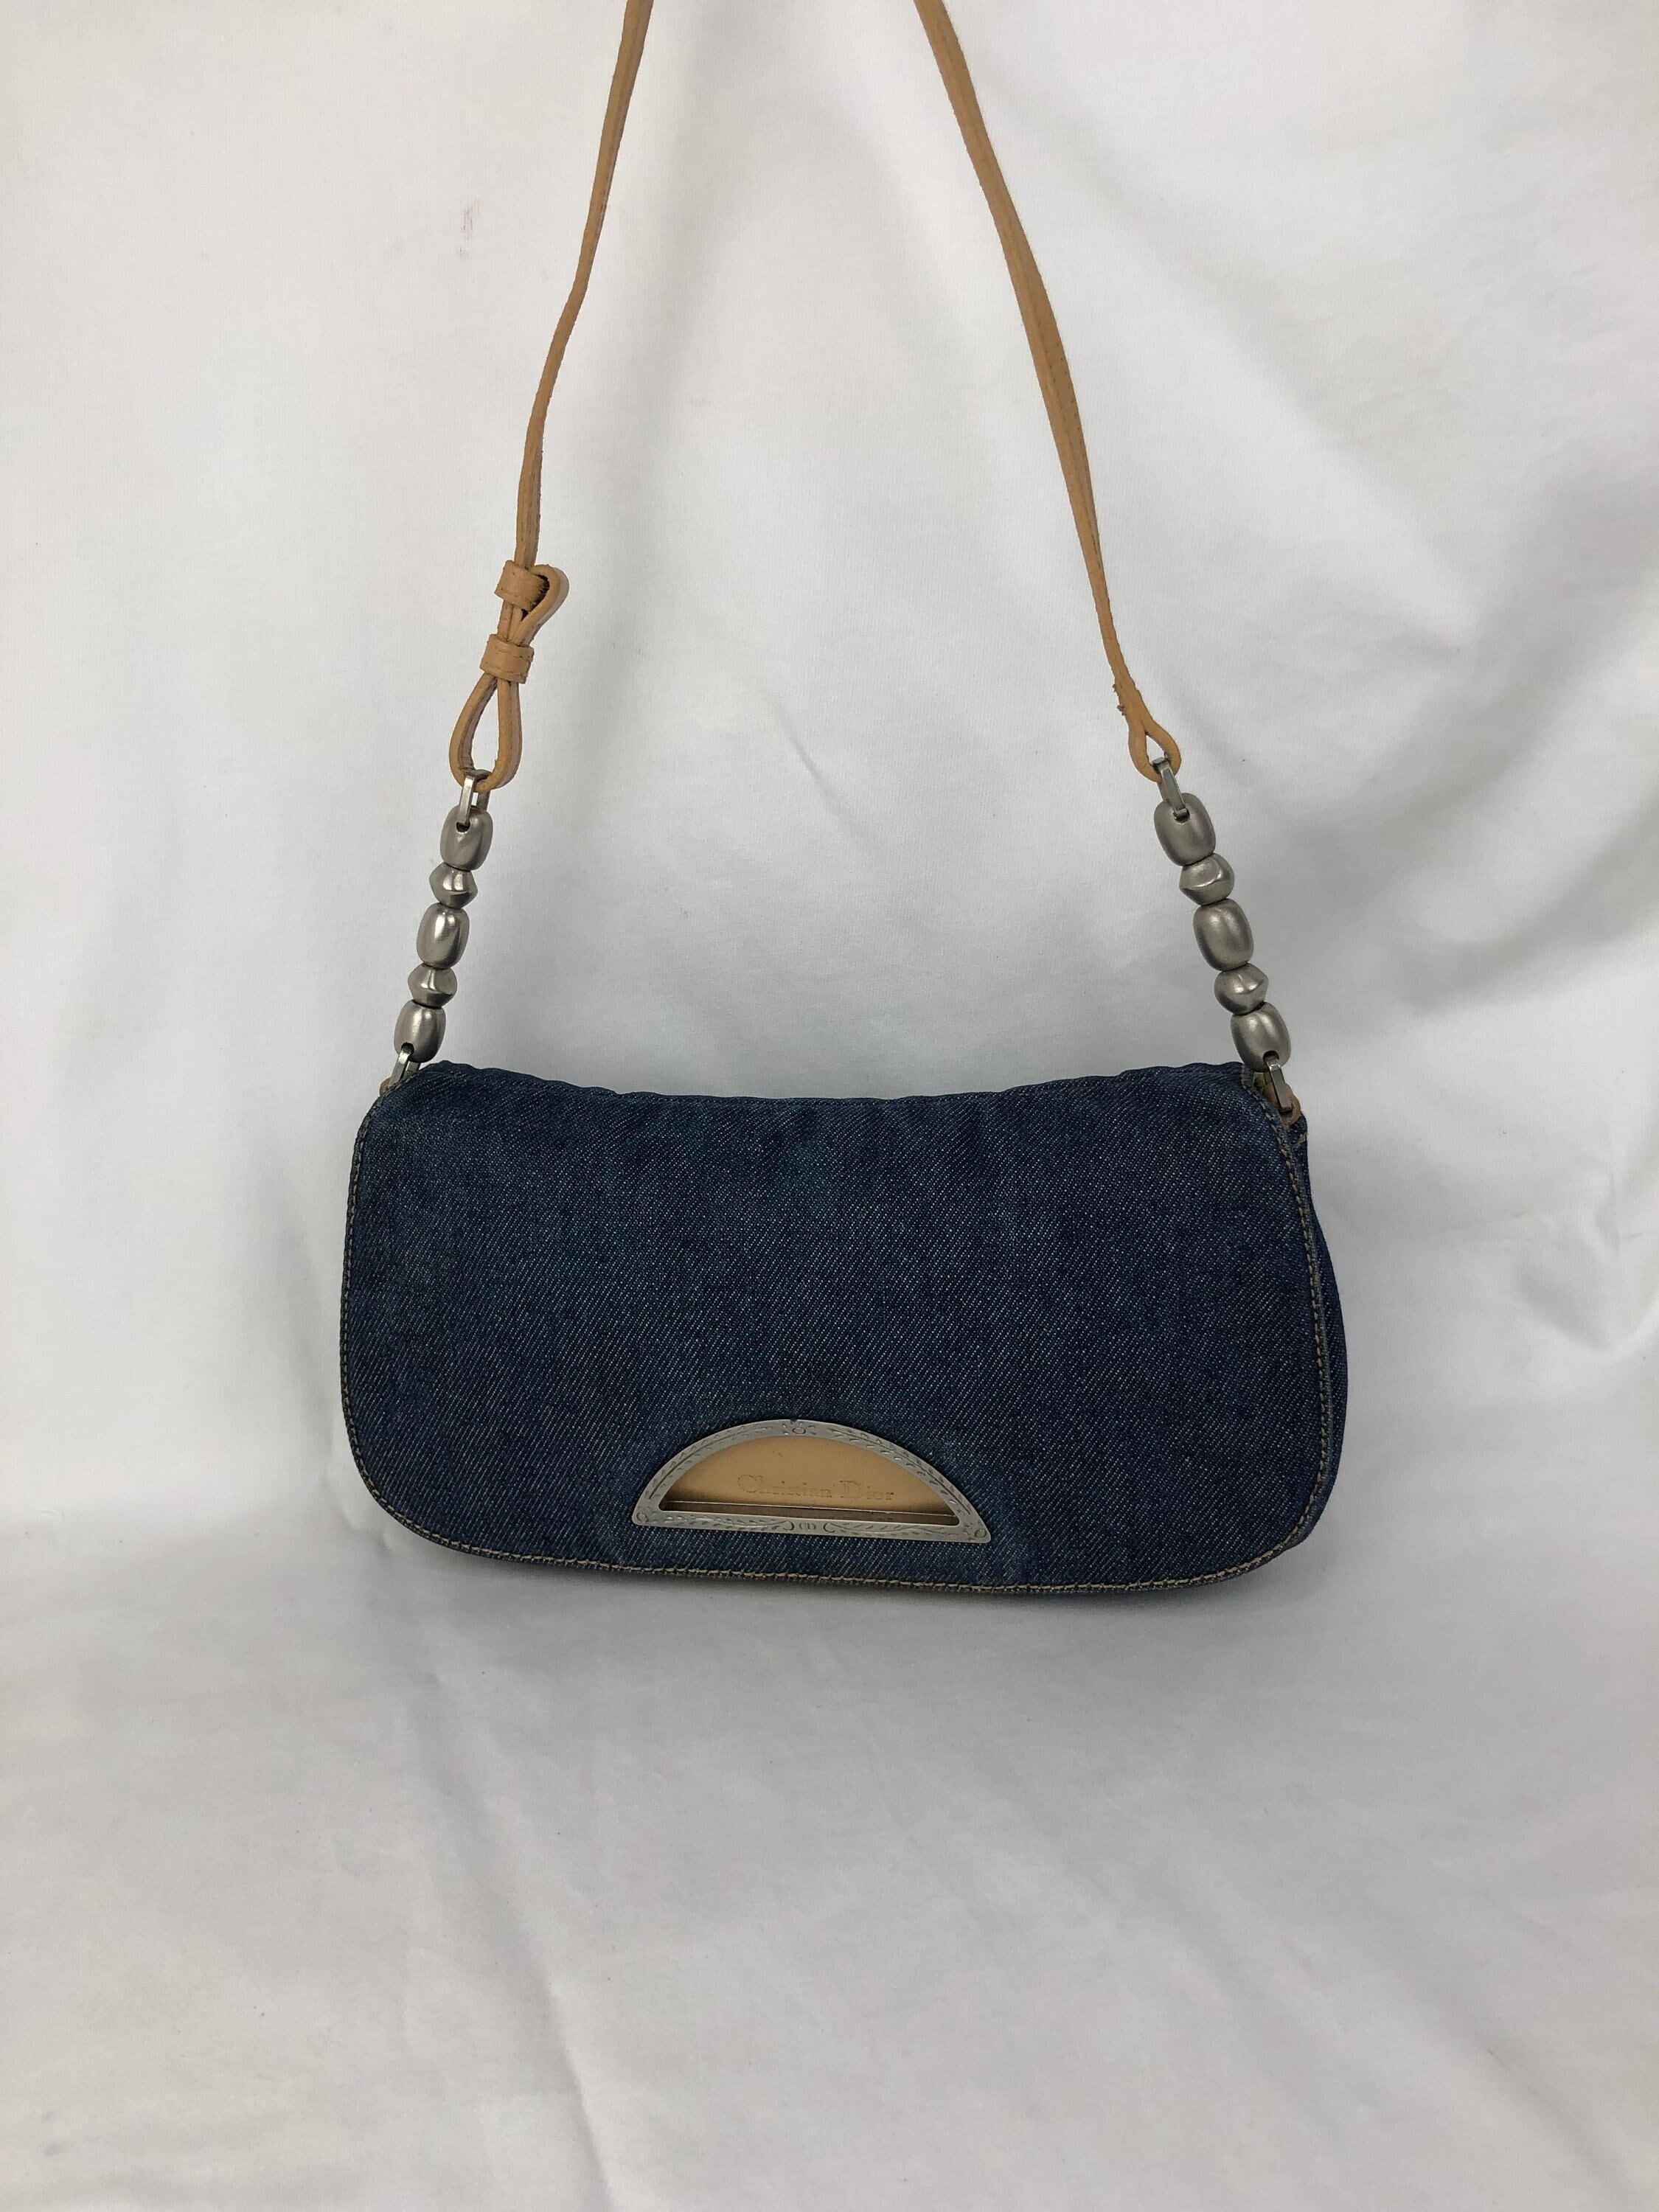 SOLD OUT DIOR Diorissimo Saddle Pochette Great condition with minor vintage  wear. Measurements: W20 x H15 x D4 cm Approx